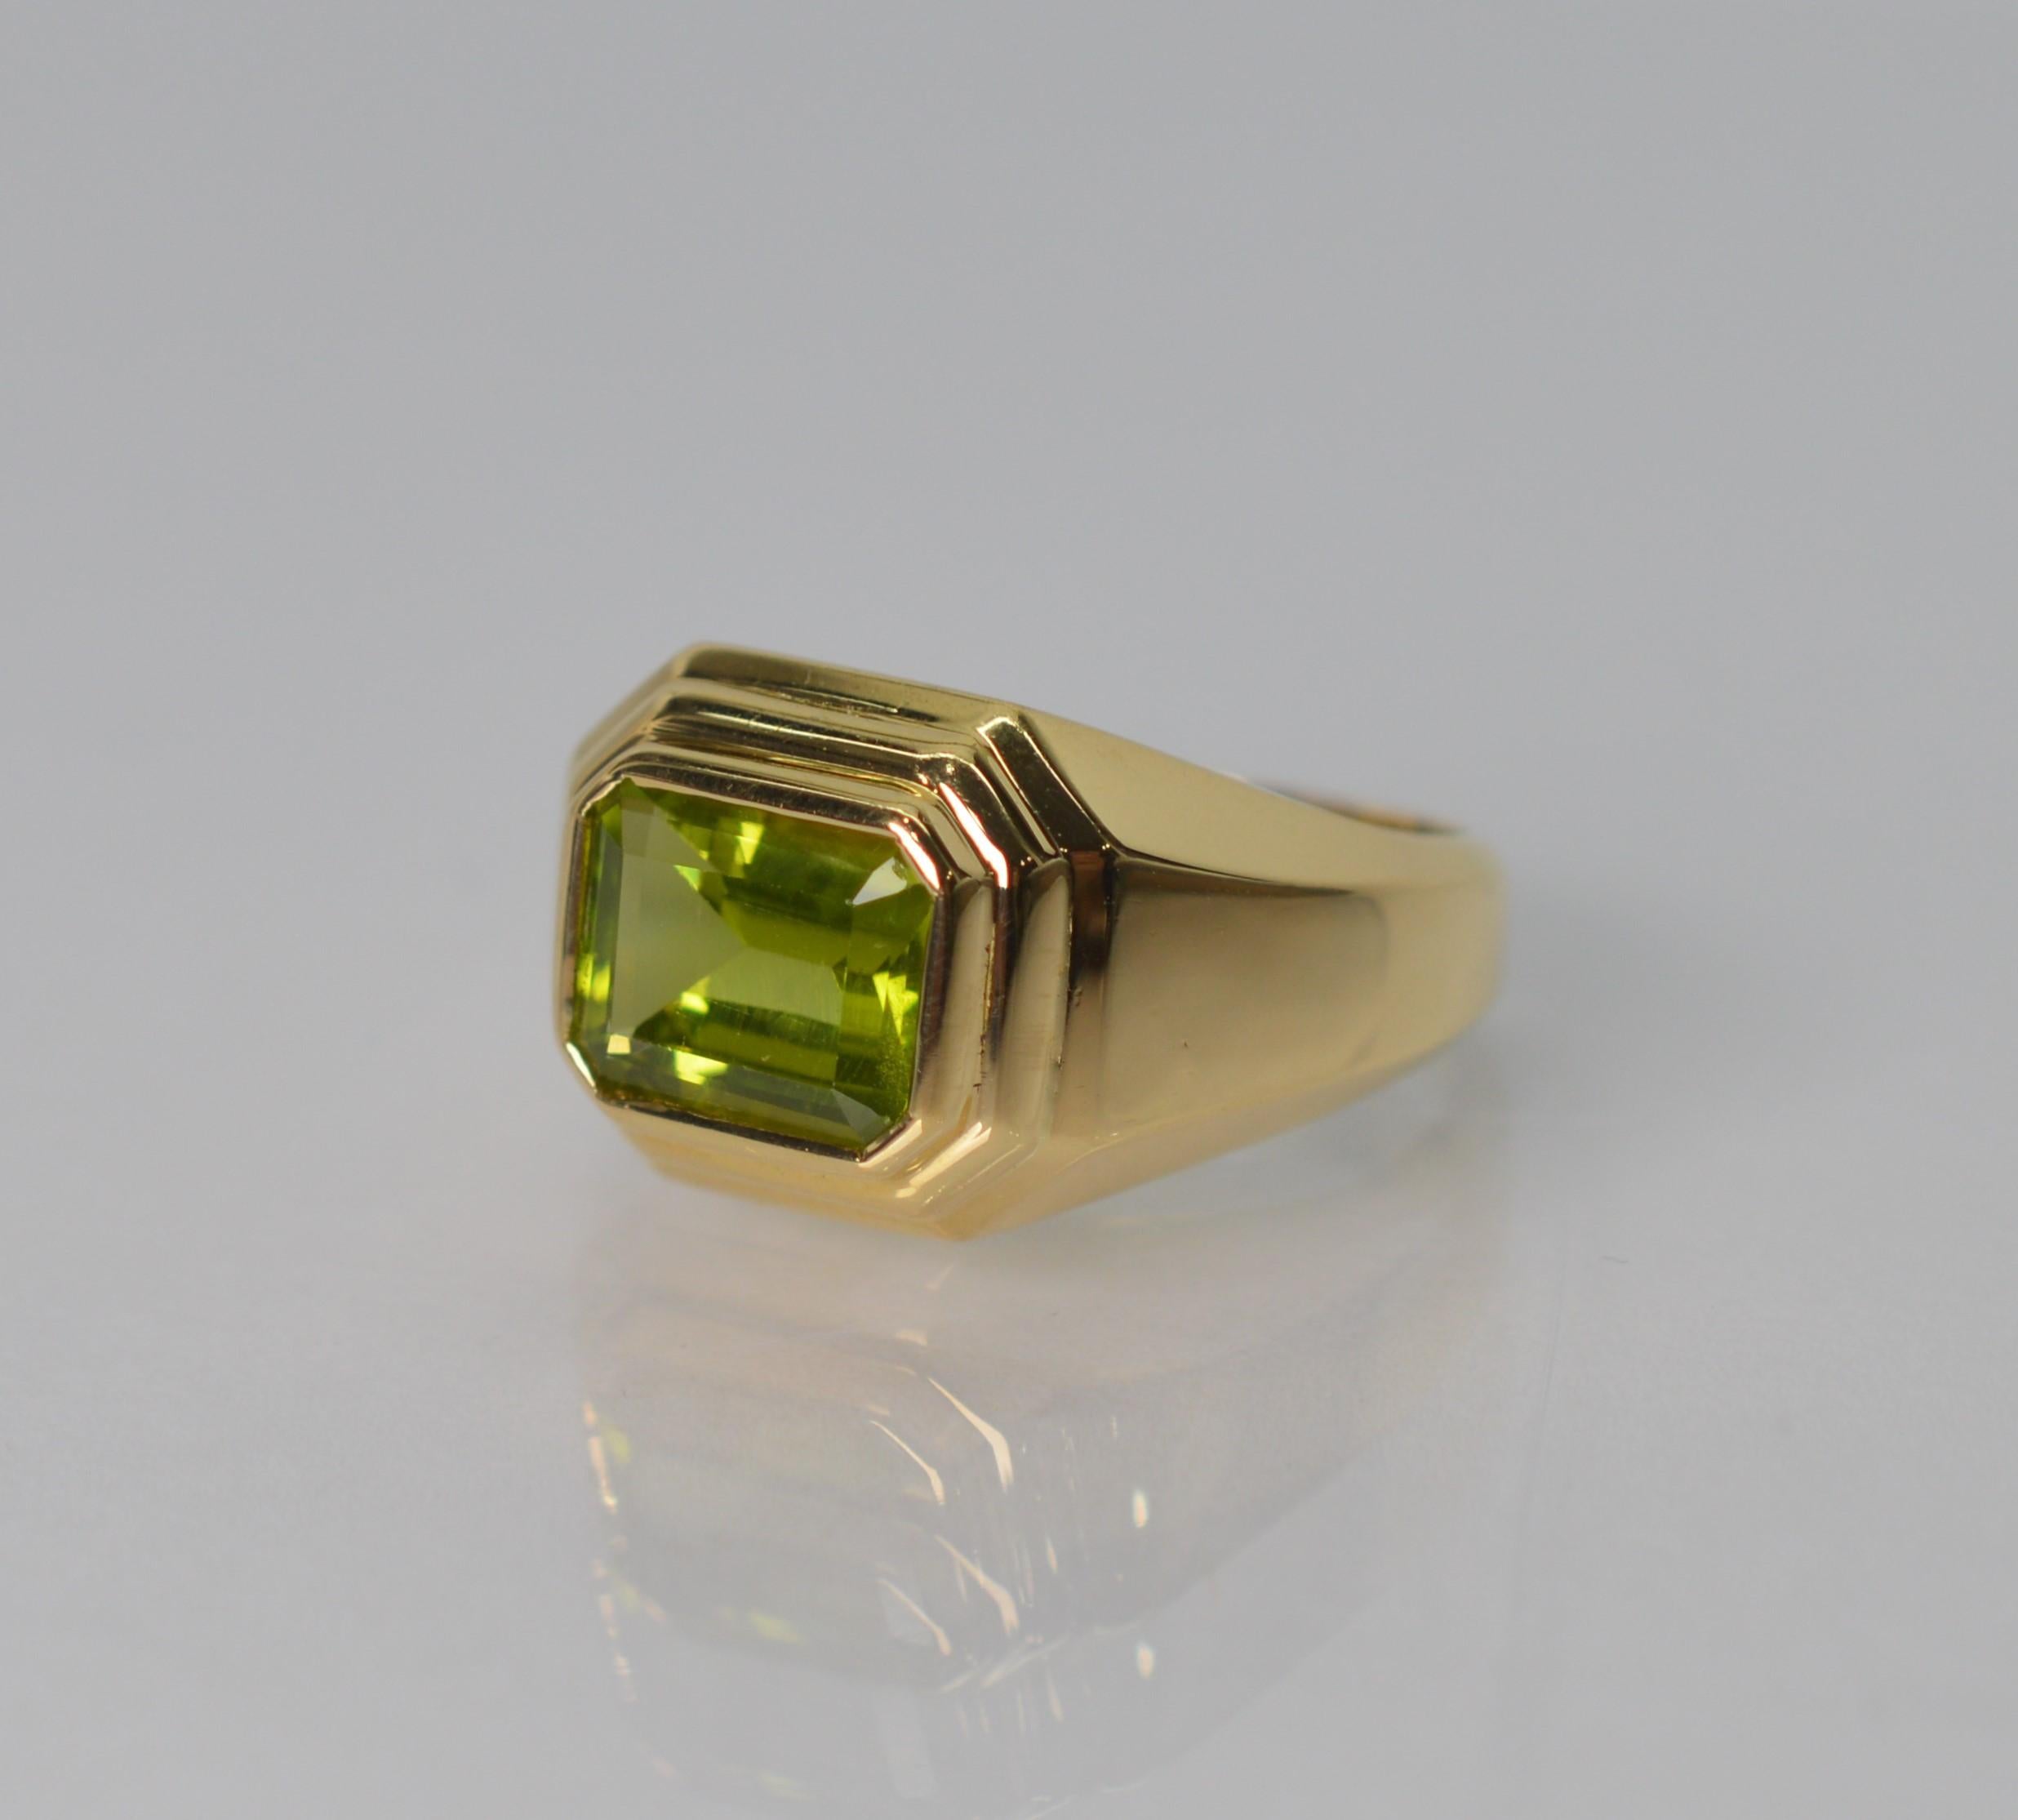 Called  a “gem of the sun” by ancient Egyptians, the peridot spiritually represents positive power and strength.  A 1.7 carat fine emerald-cut natural peridot stone with beautiful yellow-green hues sits a top steps of polished eighteen karat (18K)